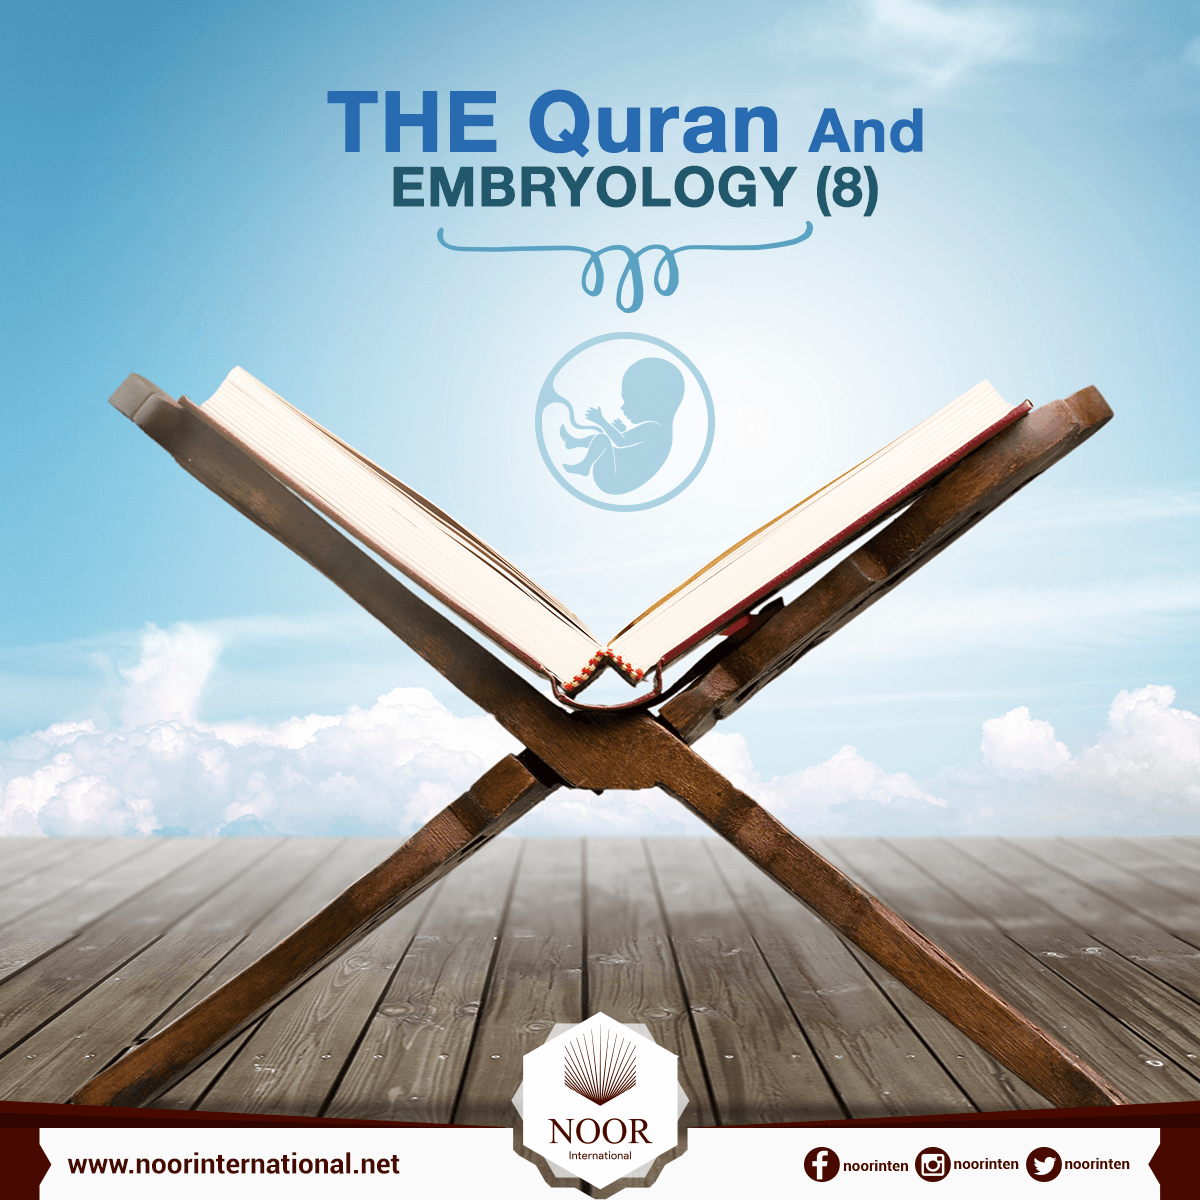 THE Quran And EMBRYOLOGY ( 8 )